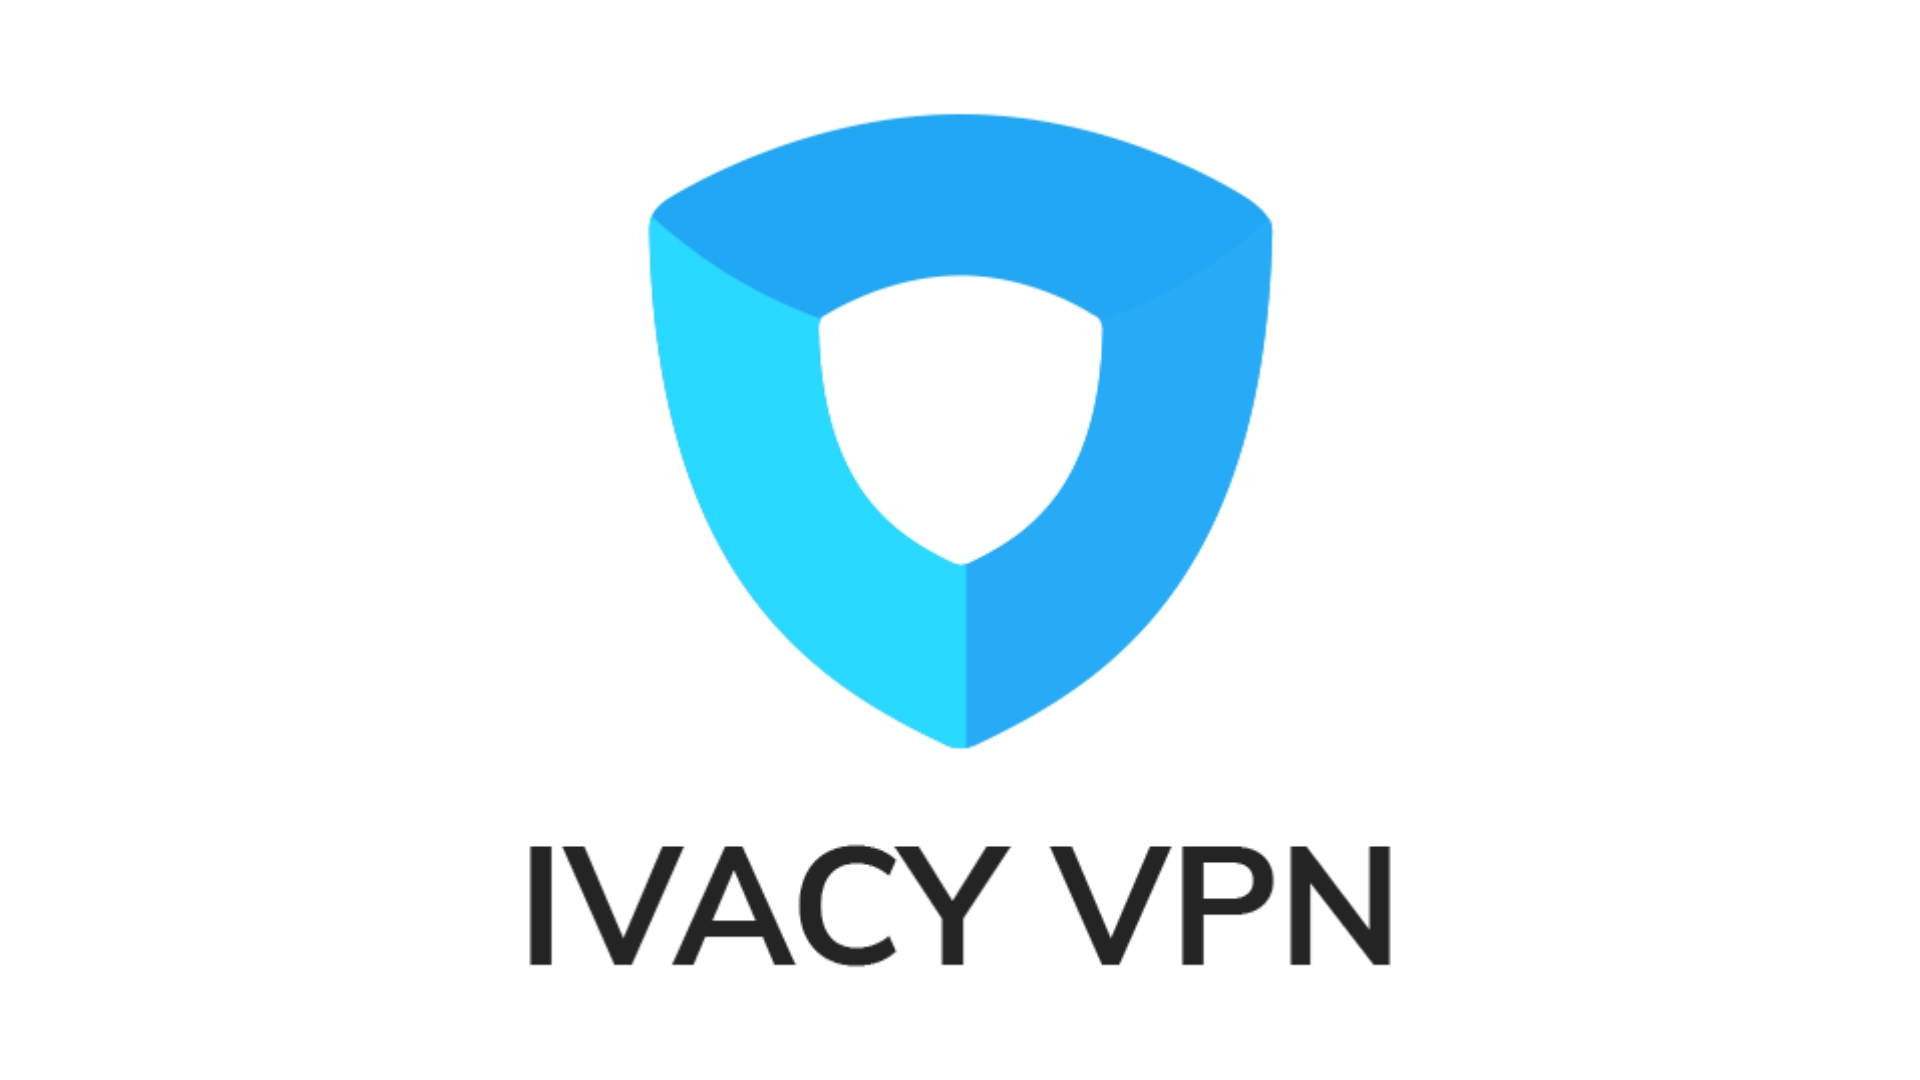 VPN costs for Ivacy VPN. Image shows the company logo.